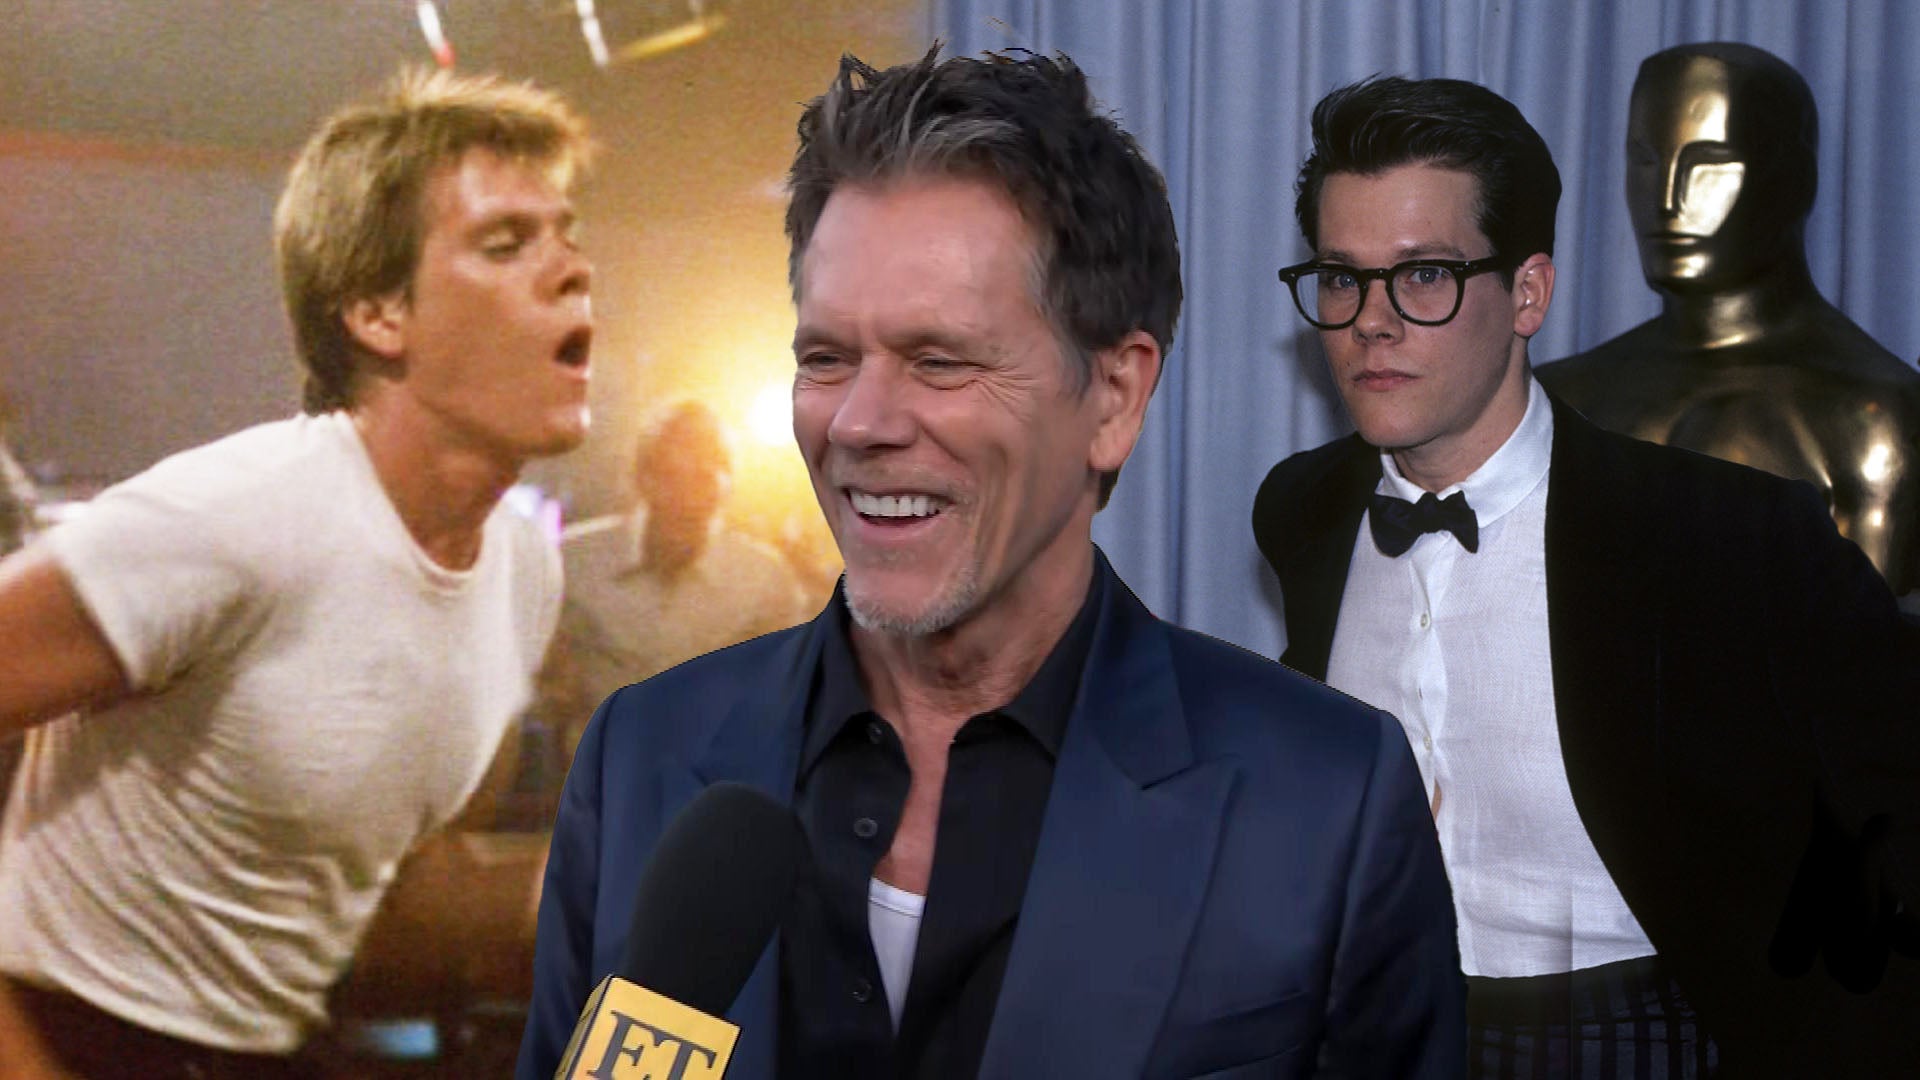 Kevin Bacon Hasn’t Been to the Oscars Since 'Footloose' Fame in 1984 (Exclusive)